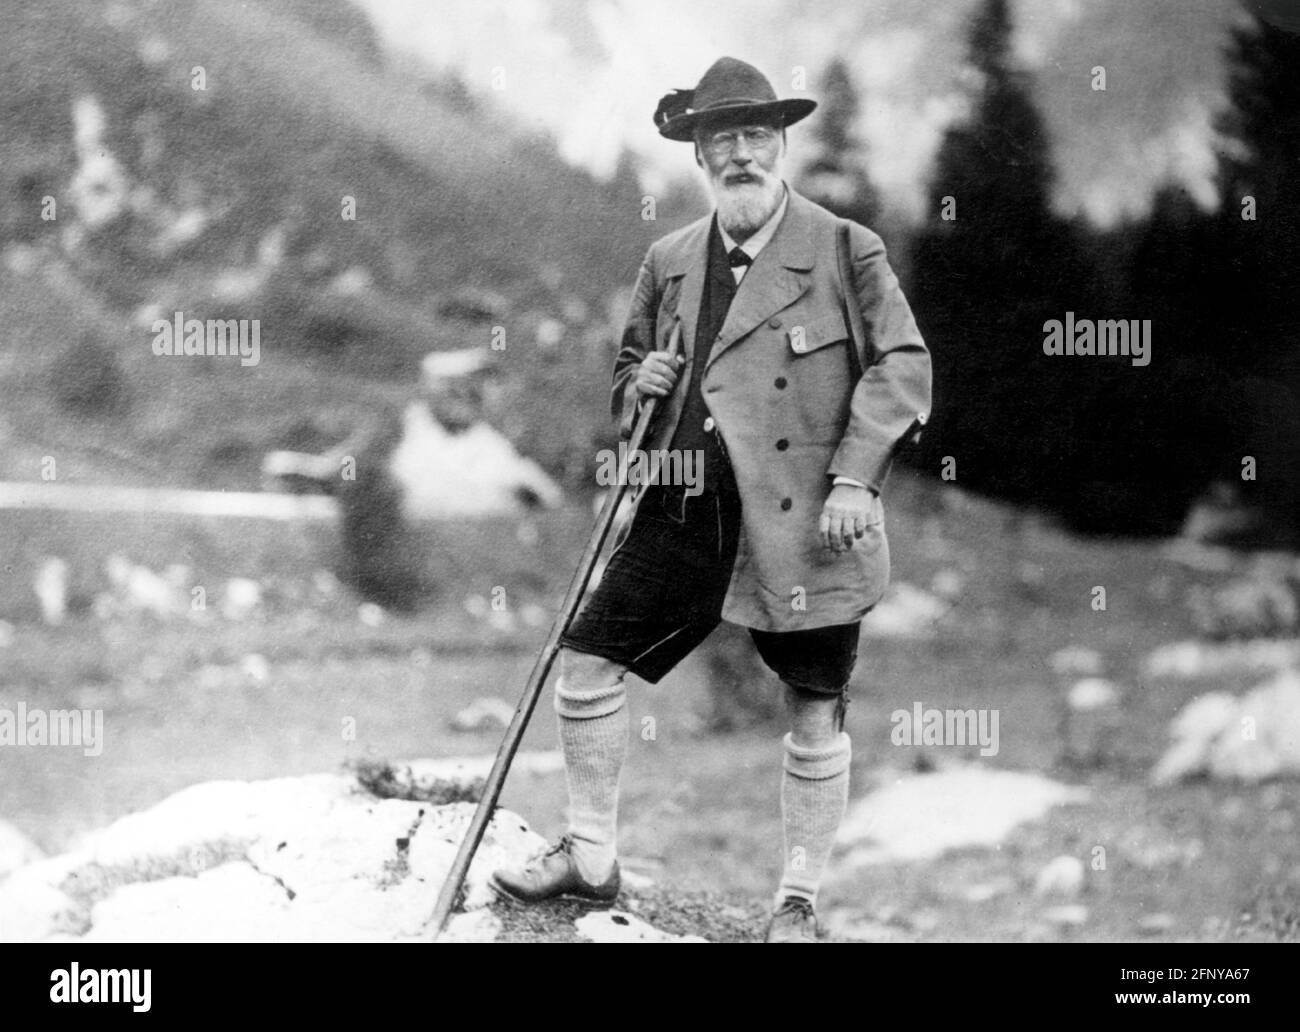 Louis III., 7.1.1845 - 18.10.1921, King of Bavaria 5.11.1913 - 8.11.1918, hunting in the Alps, 1910, ADDITIONAL-RIGHTS-CLEARANCE-INFO-NOT-AVAILABLE Stock Photo